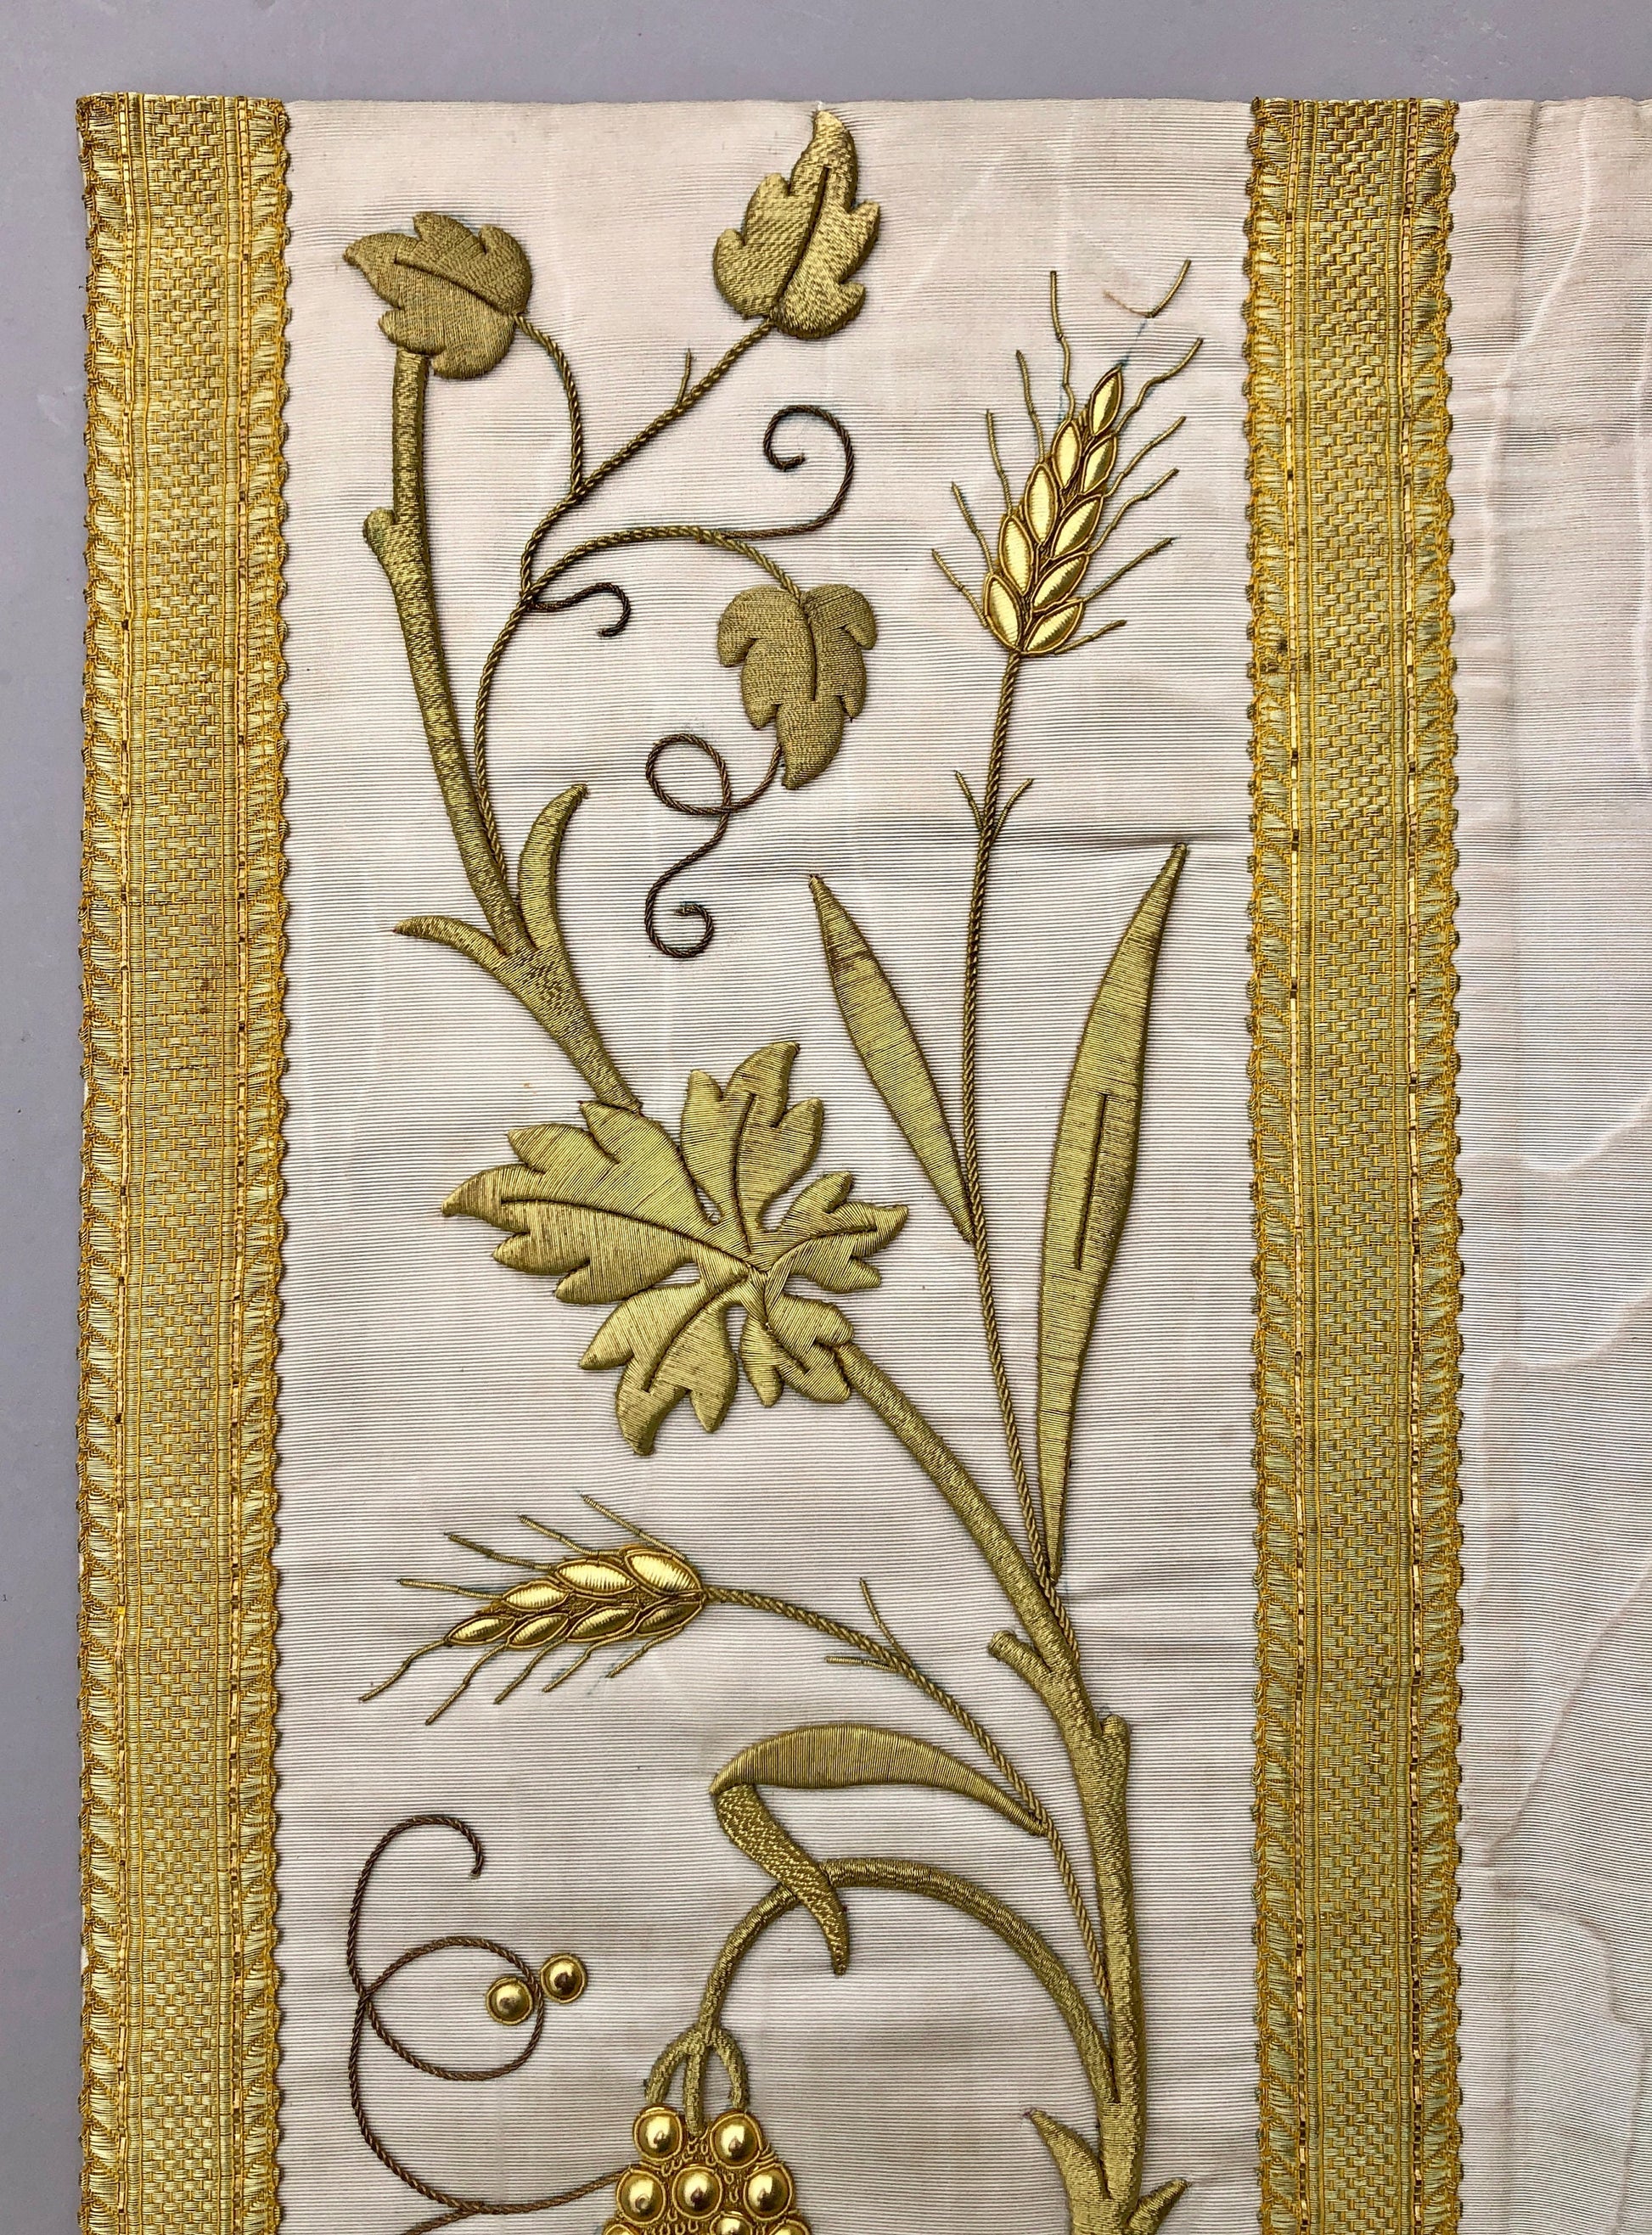 A Textile Sample From Lyon, France. Design for a Chasuble. Heavily Embroidered With Gold Thread. Late 19th Century. 58x 47.5 cms.